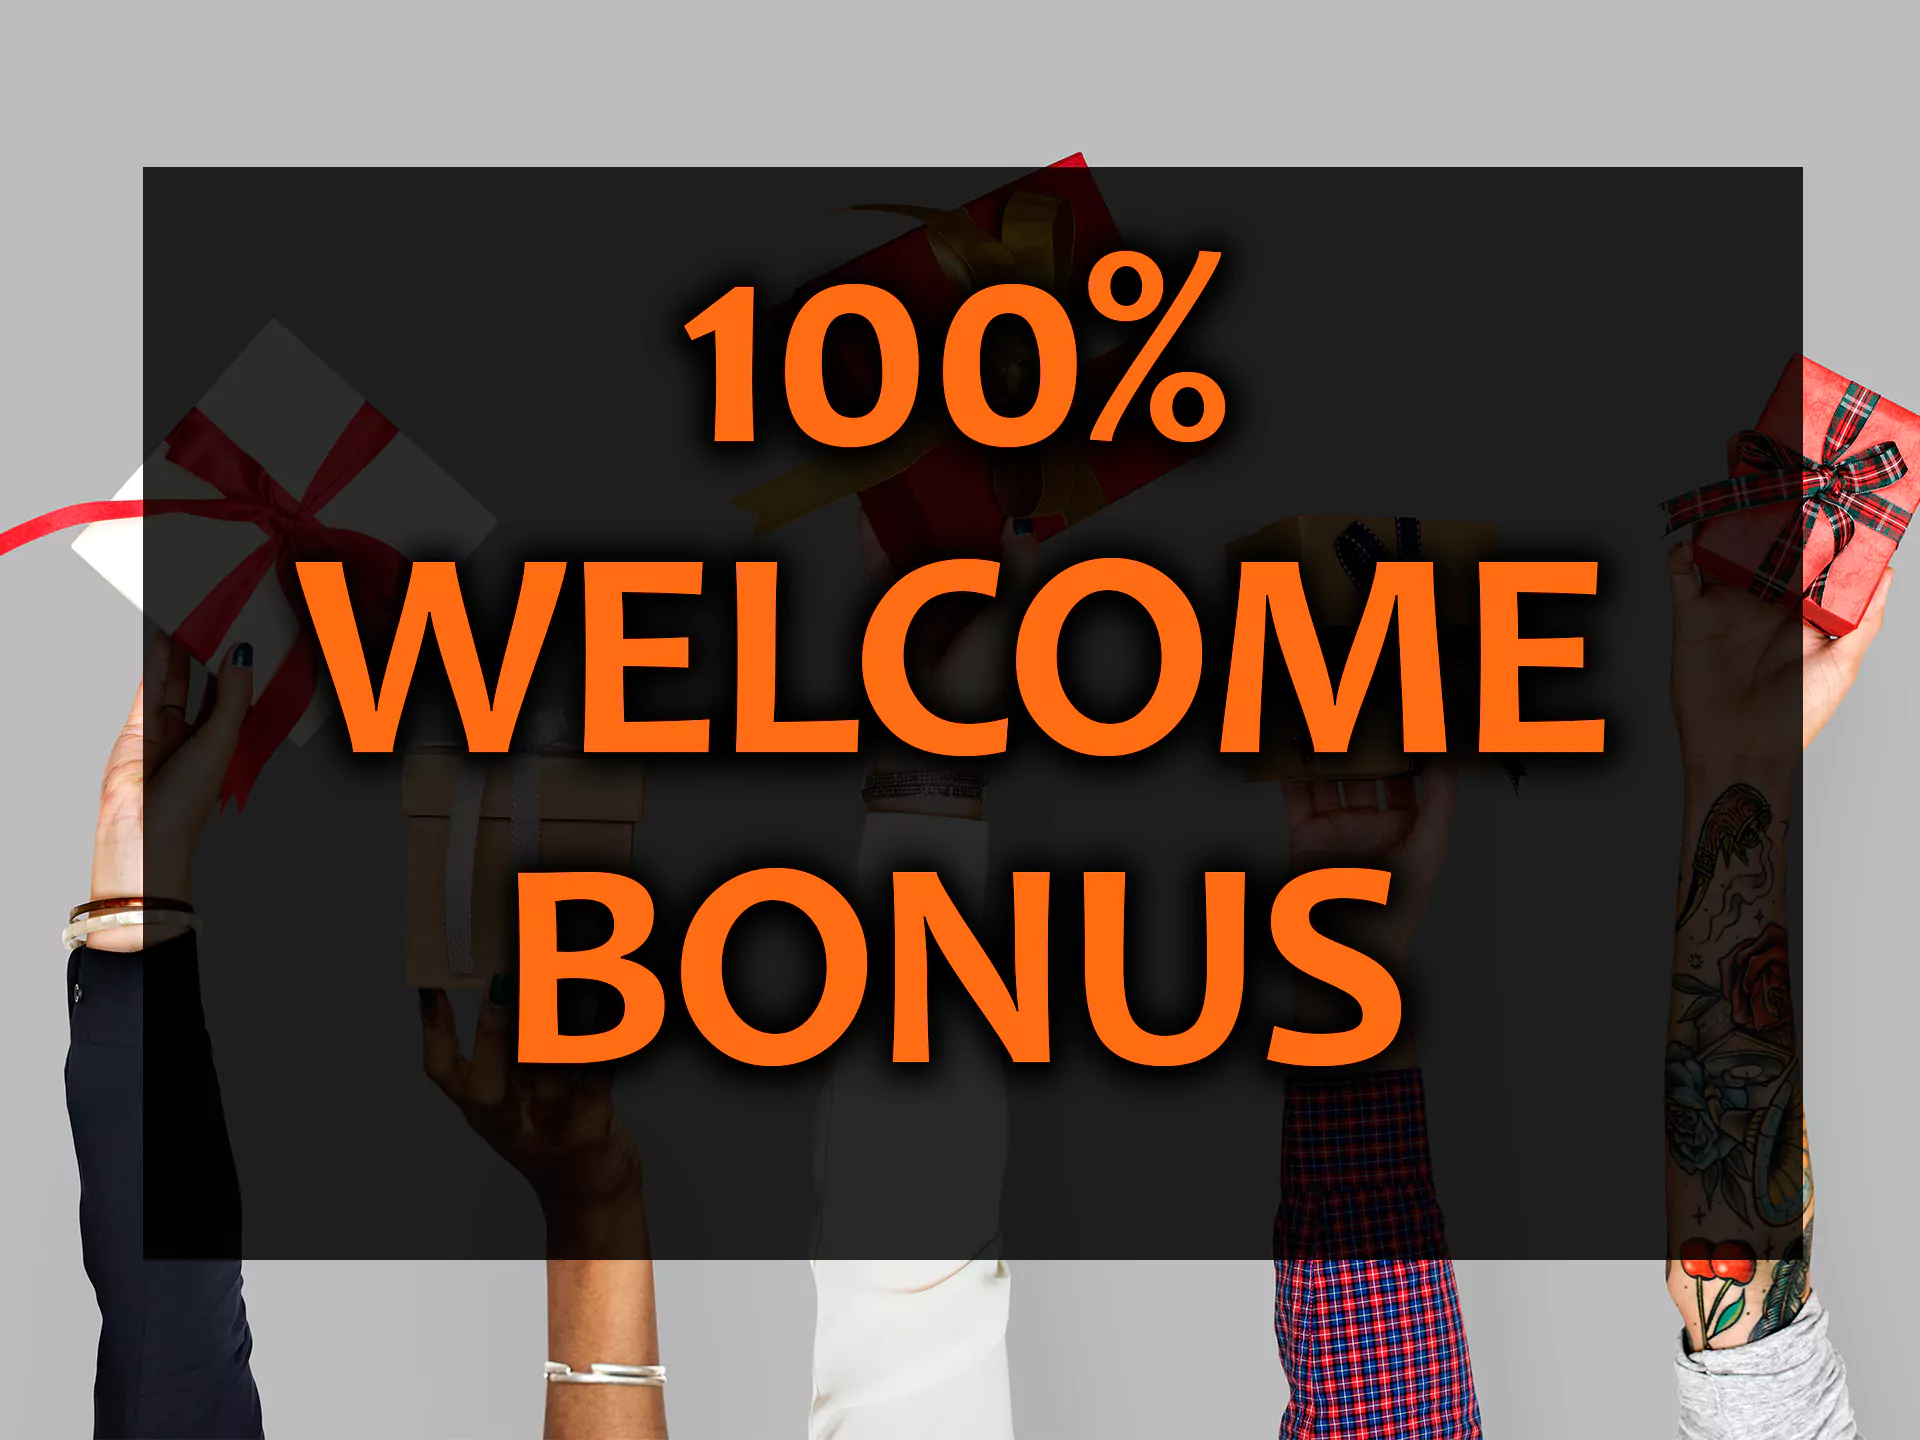 You can get a 100% welcome bonus right after the first deposit.